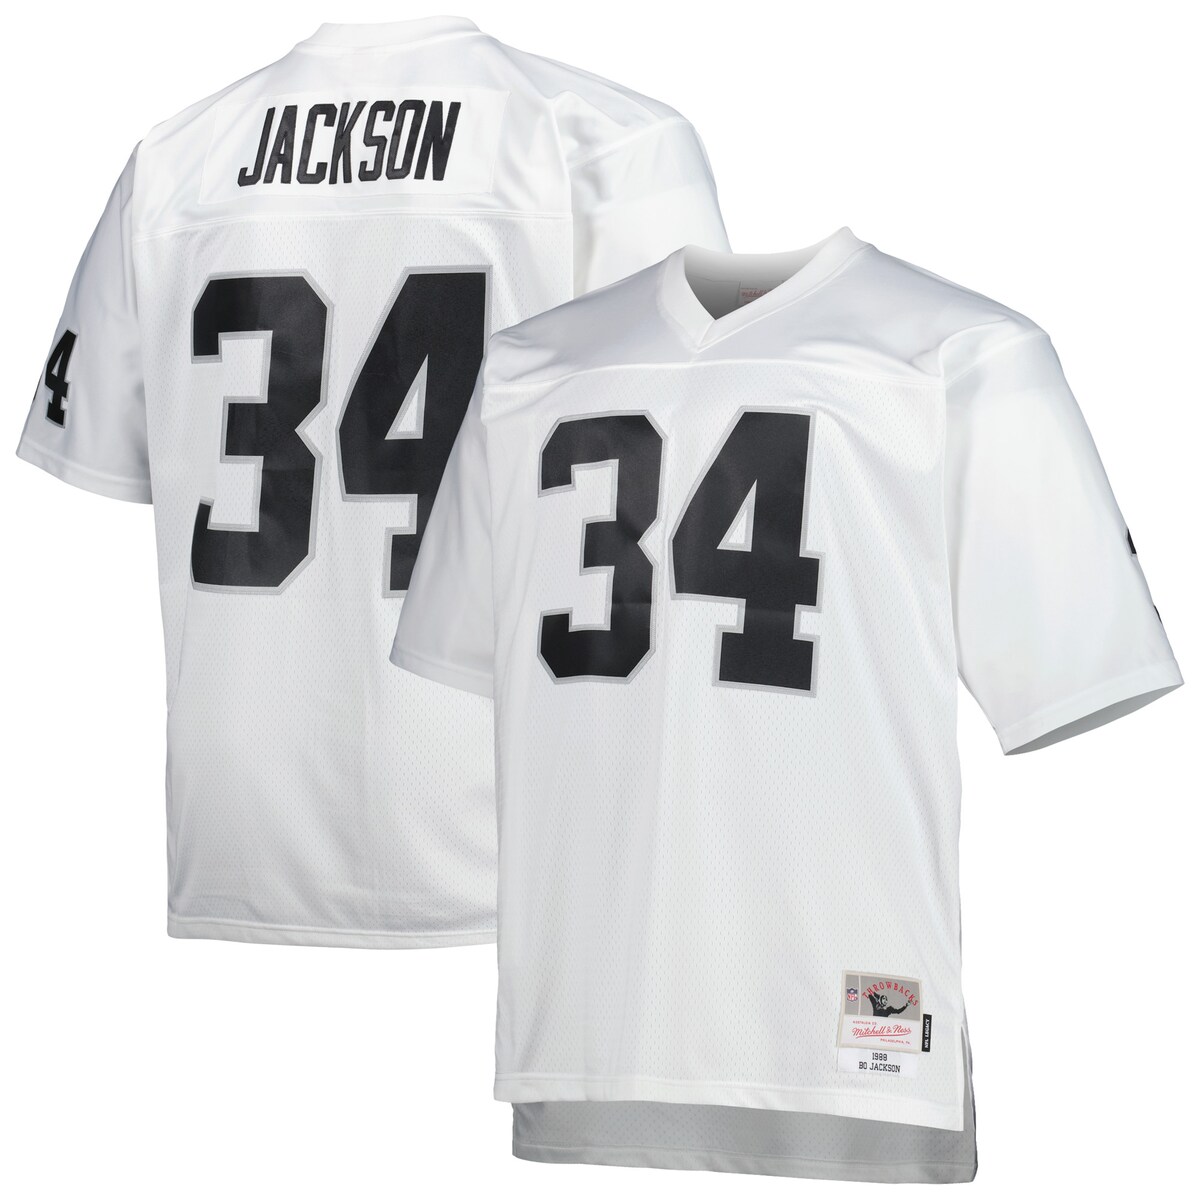 When you're gearing up for the gridiron action, celebrate one of the greatest players in the storied history of your franchise with this Bo Jackson Las Vegas Raiders Retired Player jersey from Mitchell & Ness. The bold graphics make it clear where your allegiance lies on Sundays. The mesh fabric adds enhanced breathability for a comfortable game day experience.Officially licensedV-neckDrop tail hem with side splitsStitched jock tag at bottom left hemMachine wash, tumble dry lowBack neck tapingStitched tackle twill letters and numbersBrand: Mitchell & NessMaterial: 100% PolyesterMesh fabricImportedReplica JerseyStitched fabric applique with player year and name